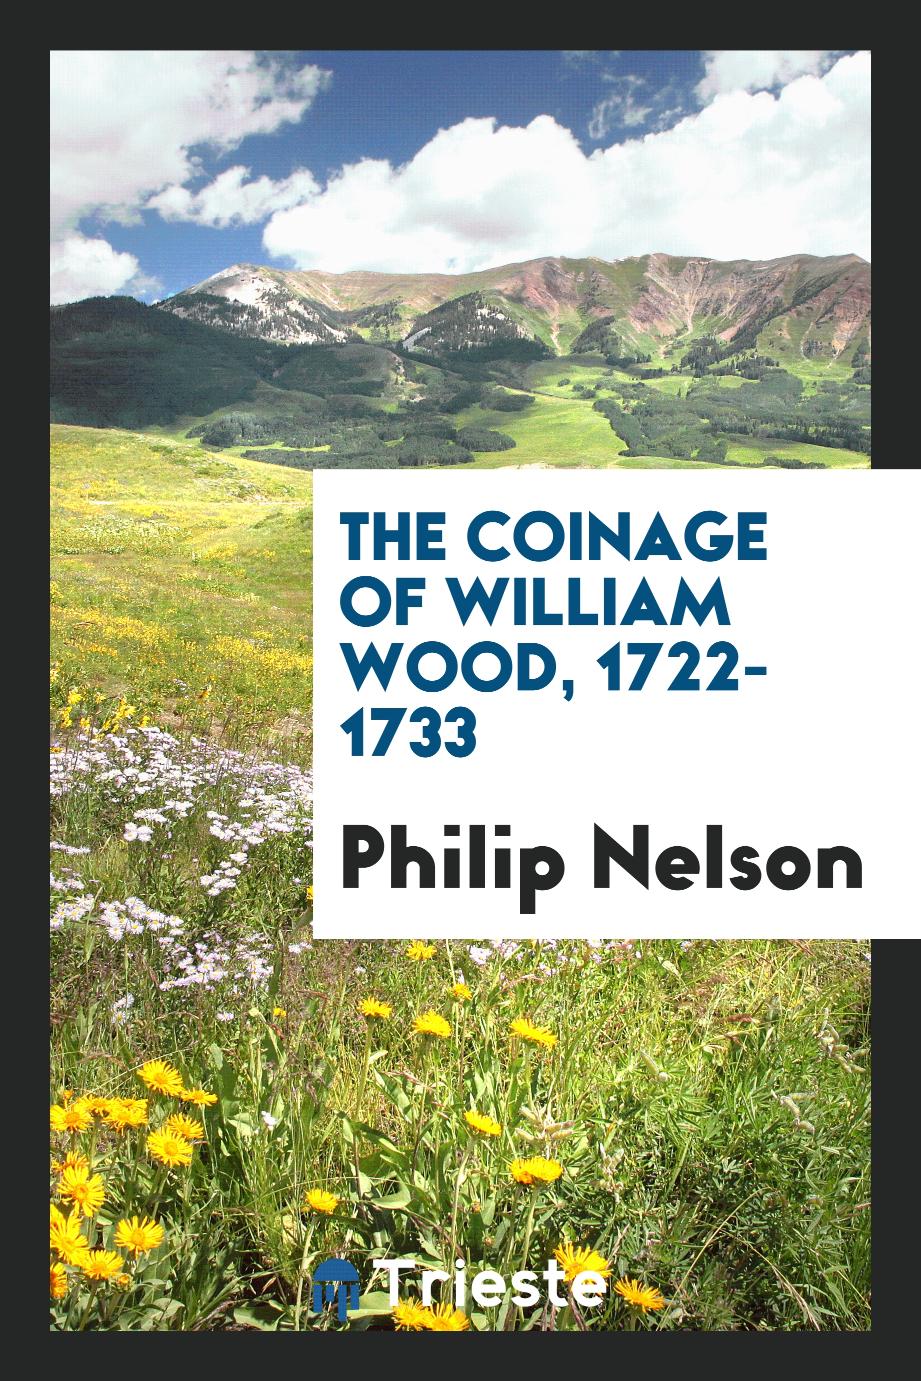 Philip Nelson - The Coinage of William Wood, 1722-1733